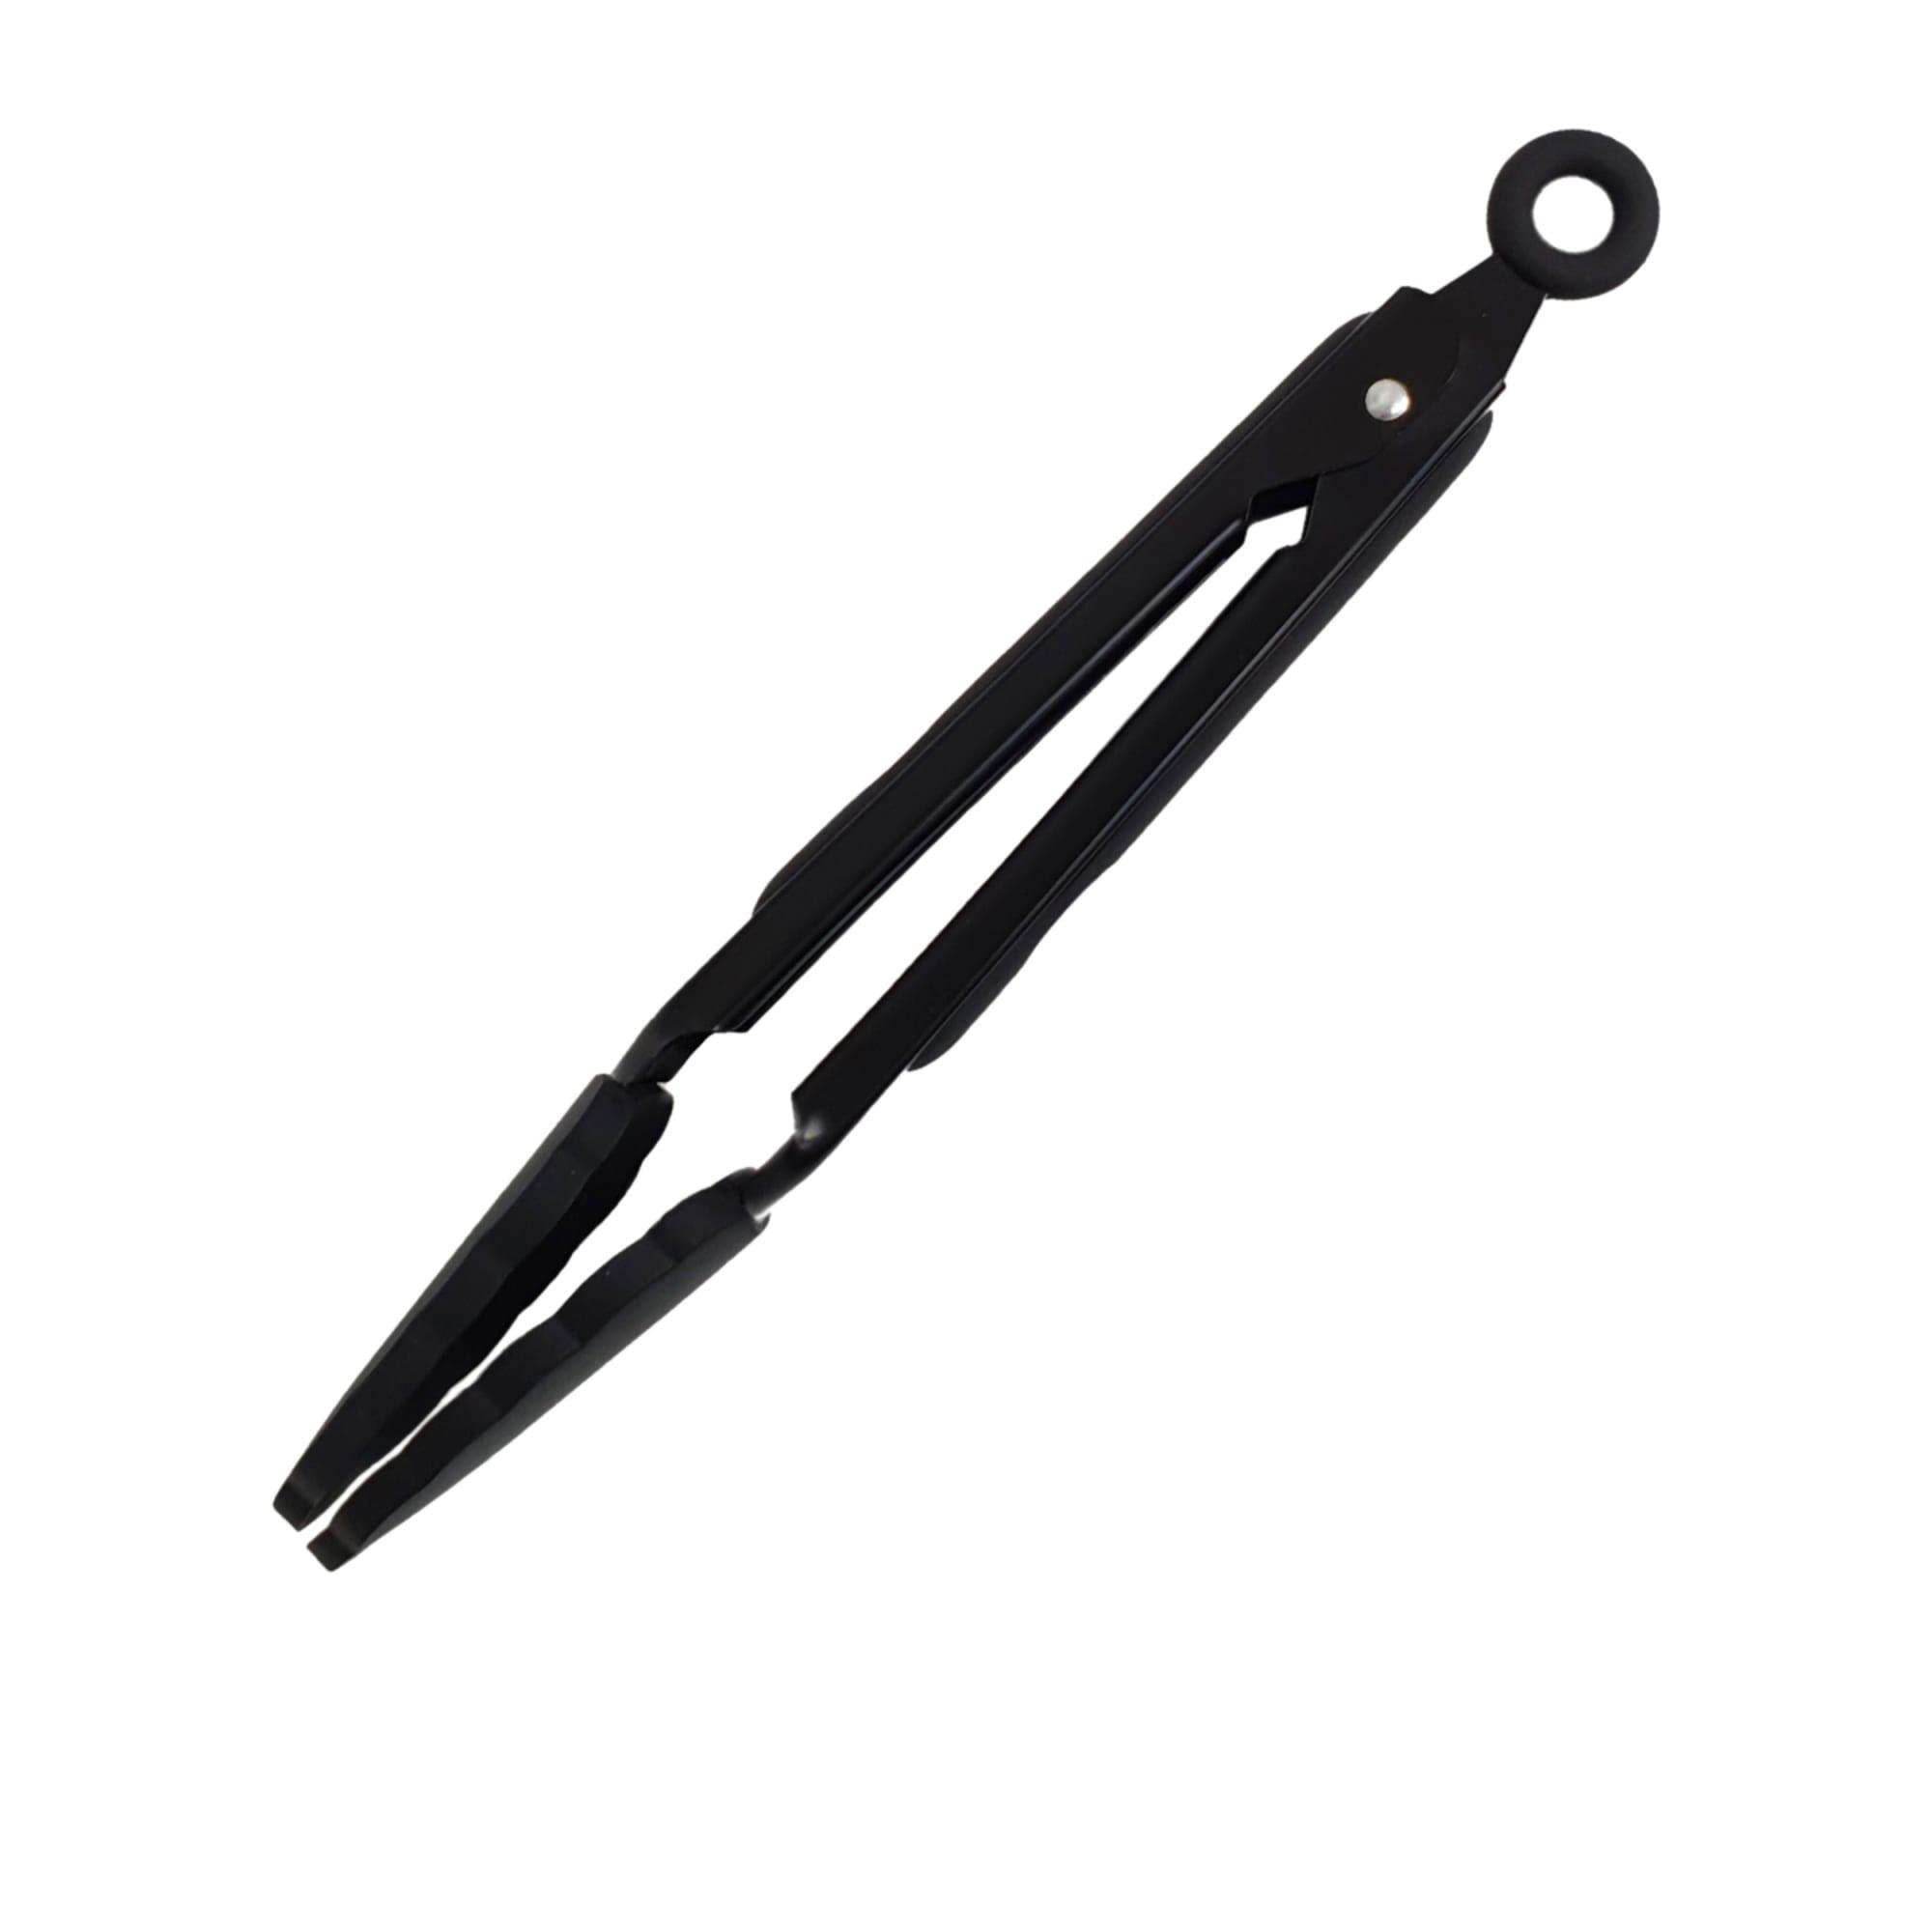 St. Clare Heavy Duty Tongs with Silicone Grip 30cm Black Image 1